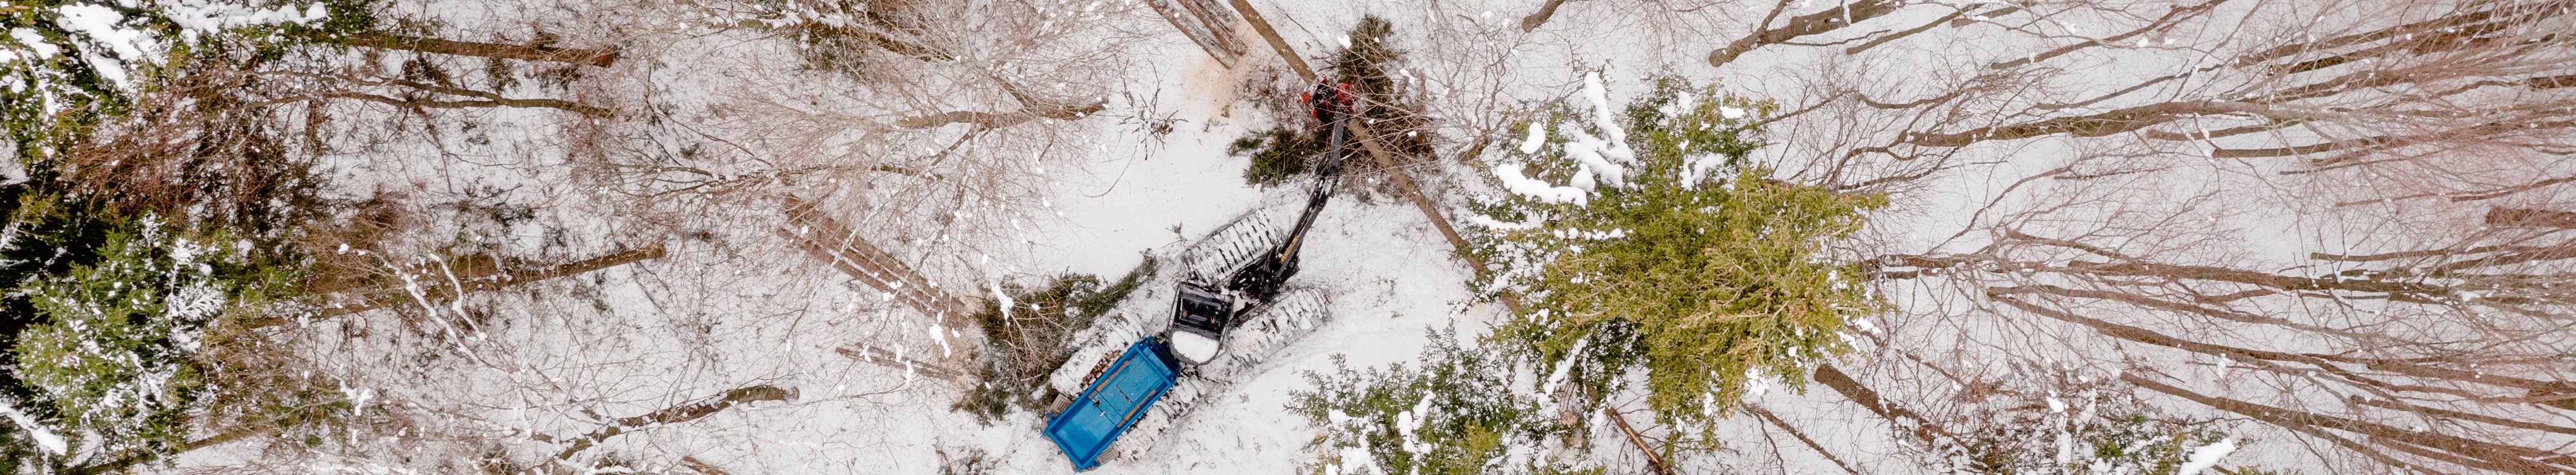 Harvester in a snowy forest filmed from above with a drone